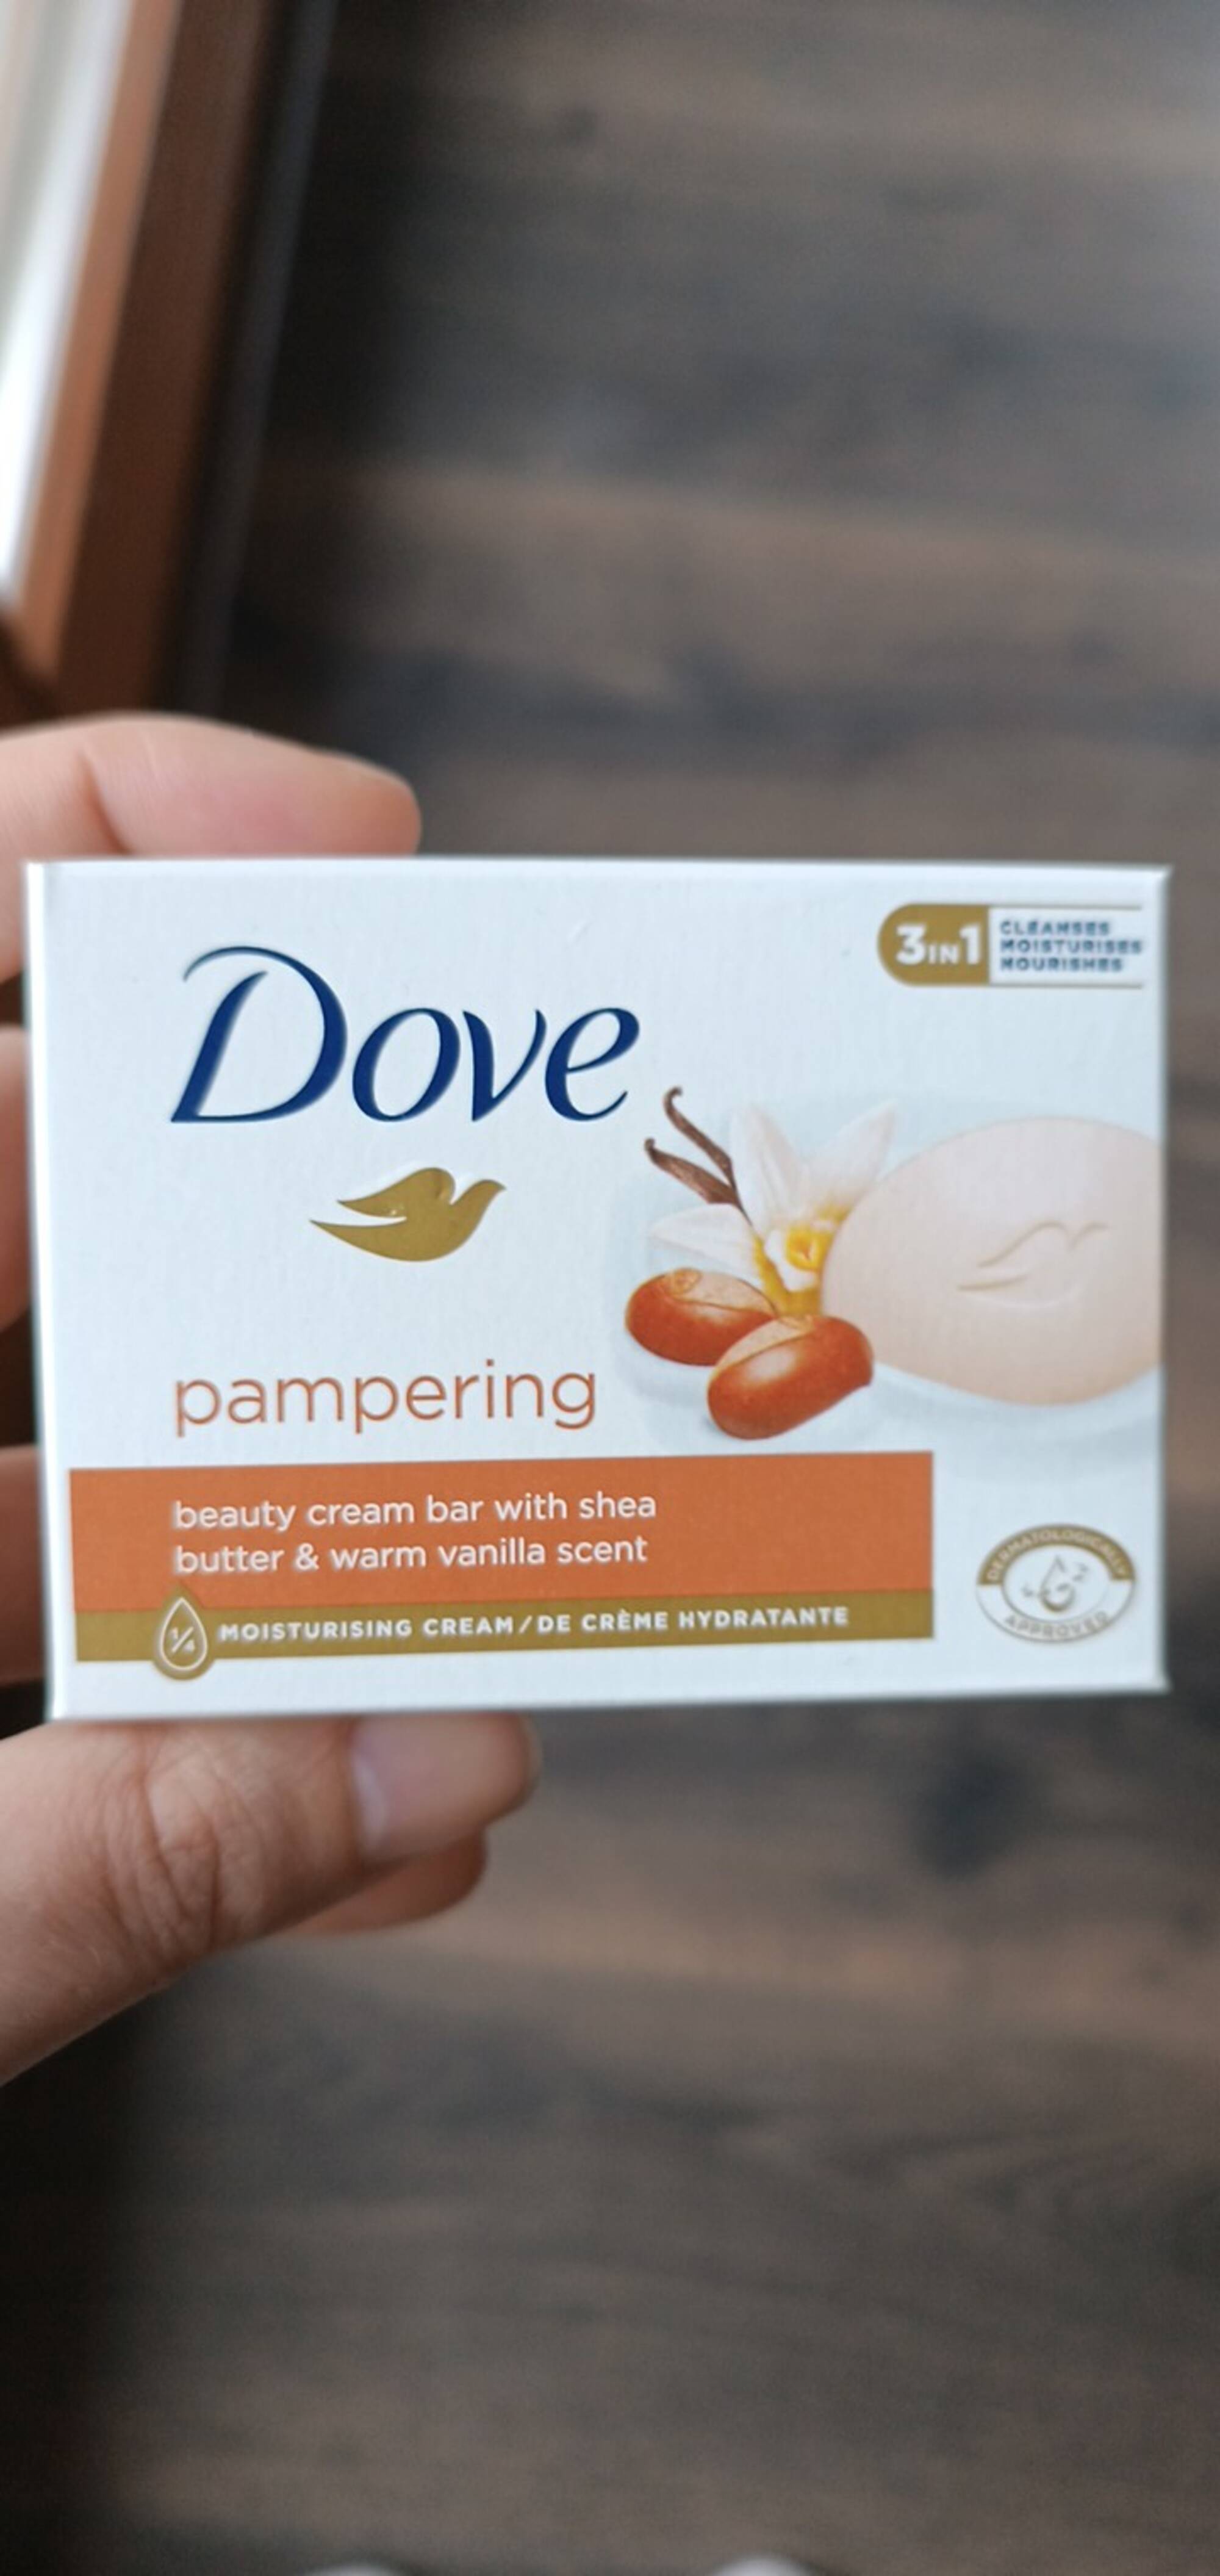 DOVE - Pampering - Beauty cream bar with shea